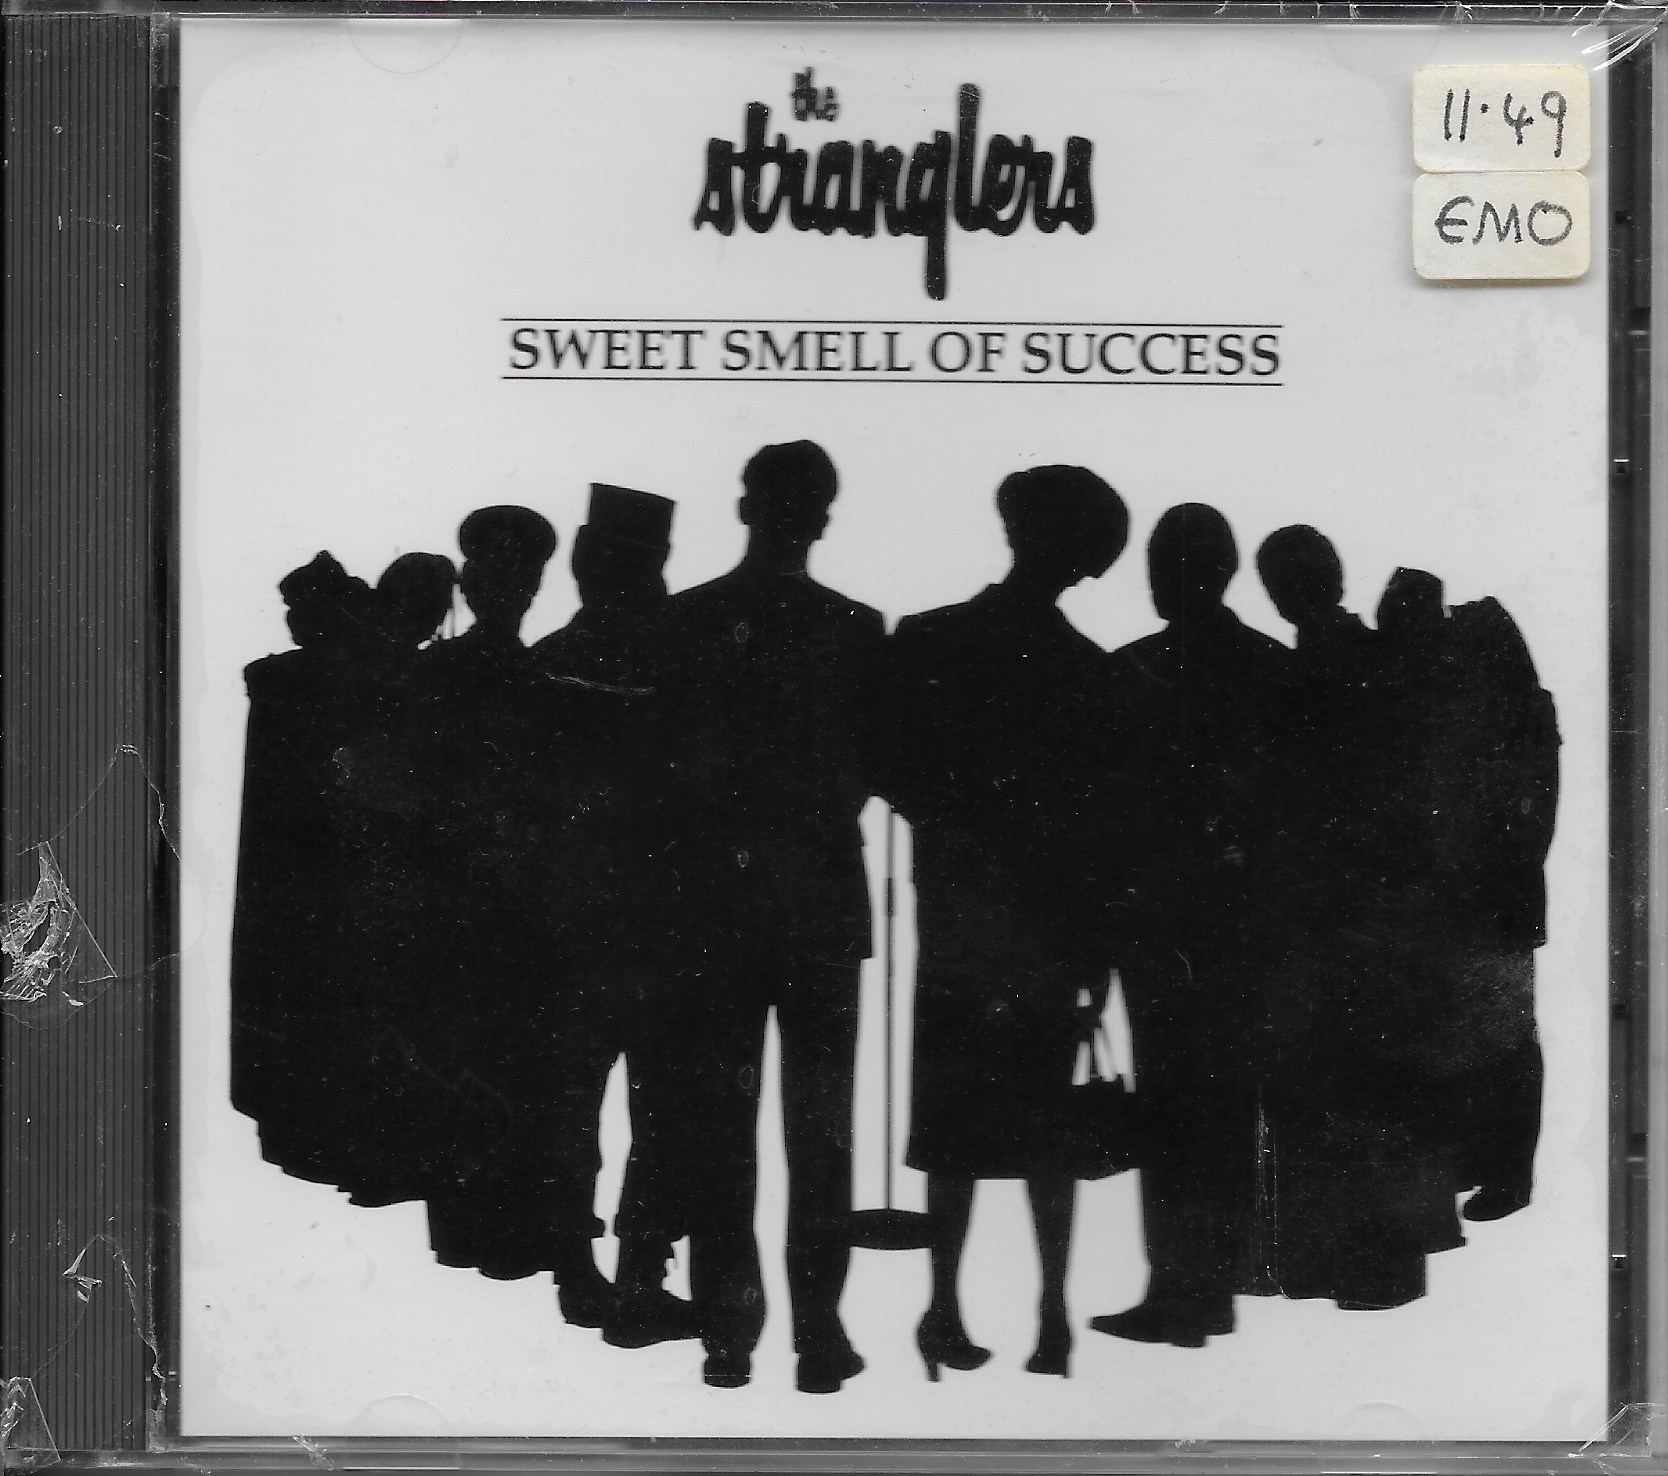 Picture of Sweet smell of success by artist The Stranglers from The Stranglers cdsingles